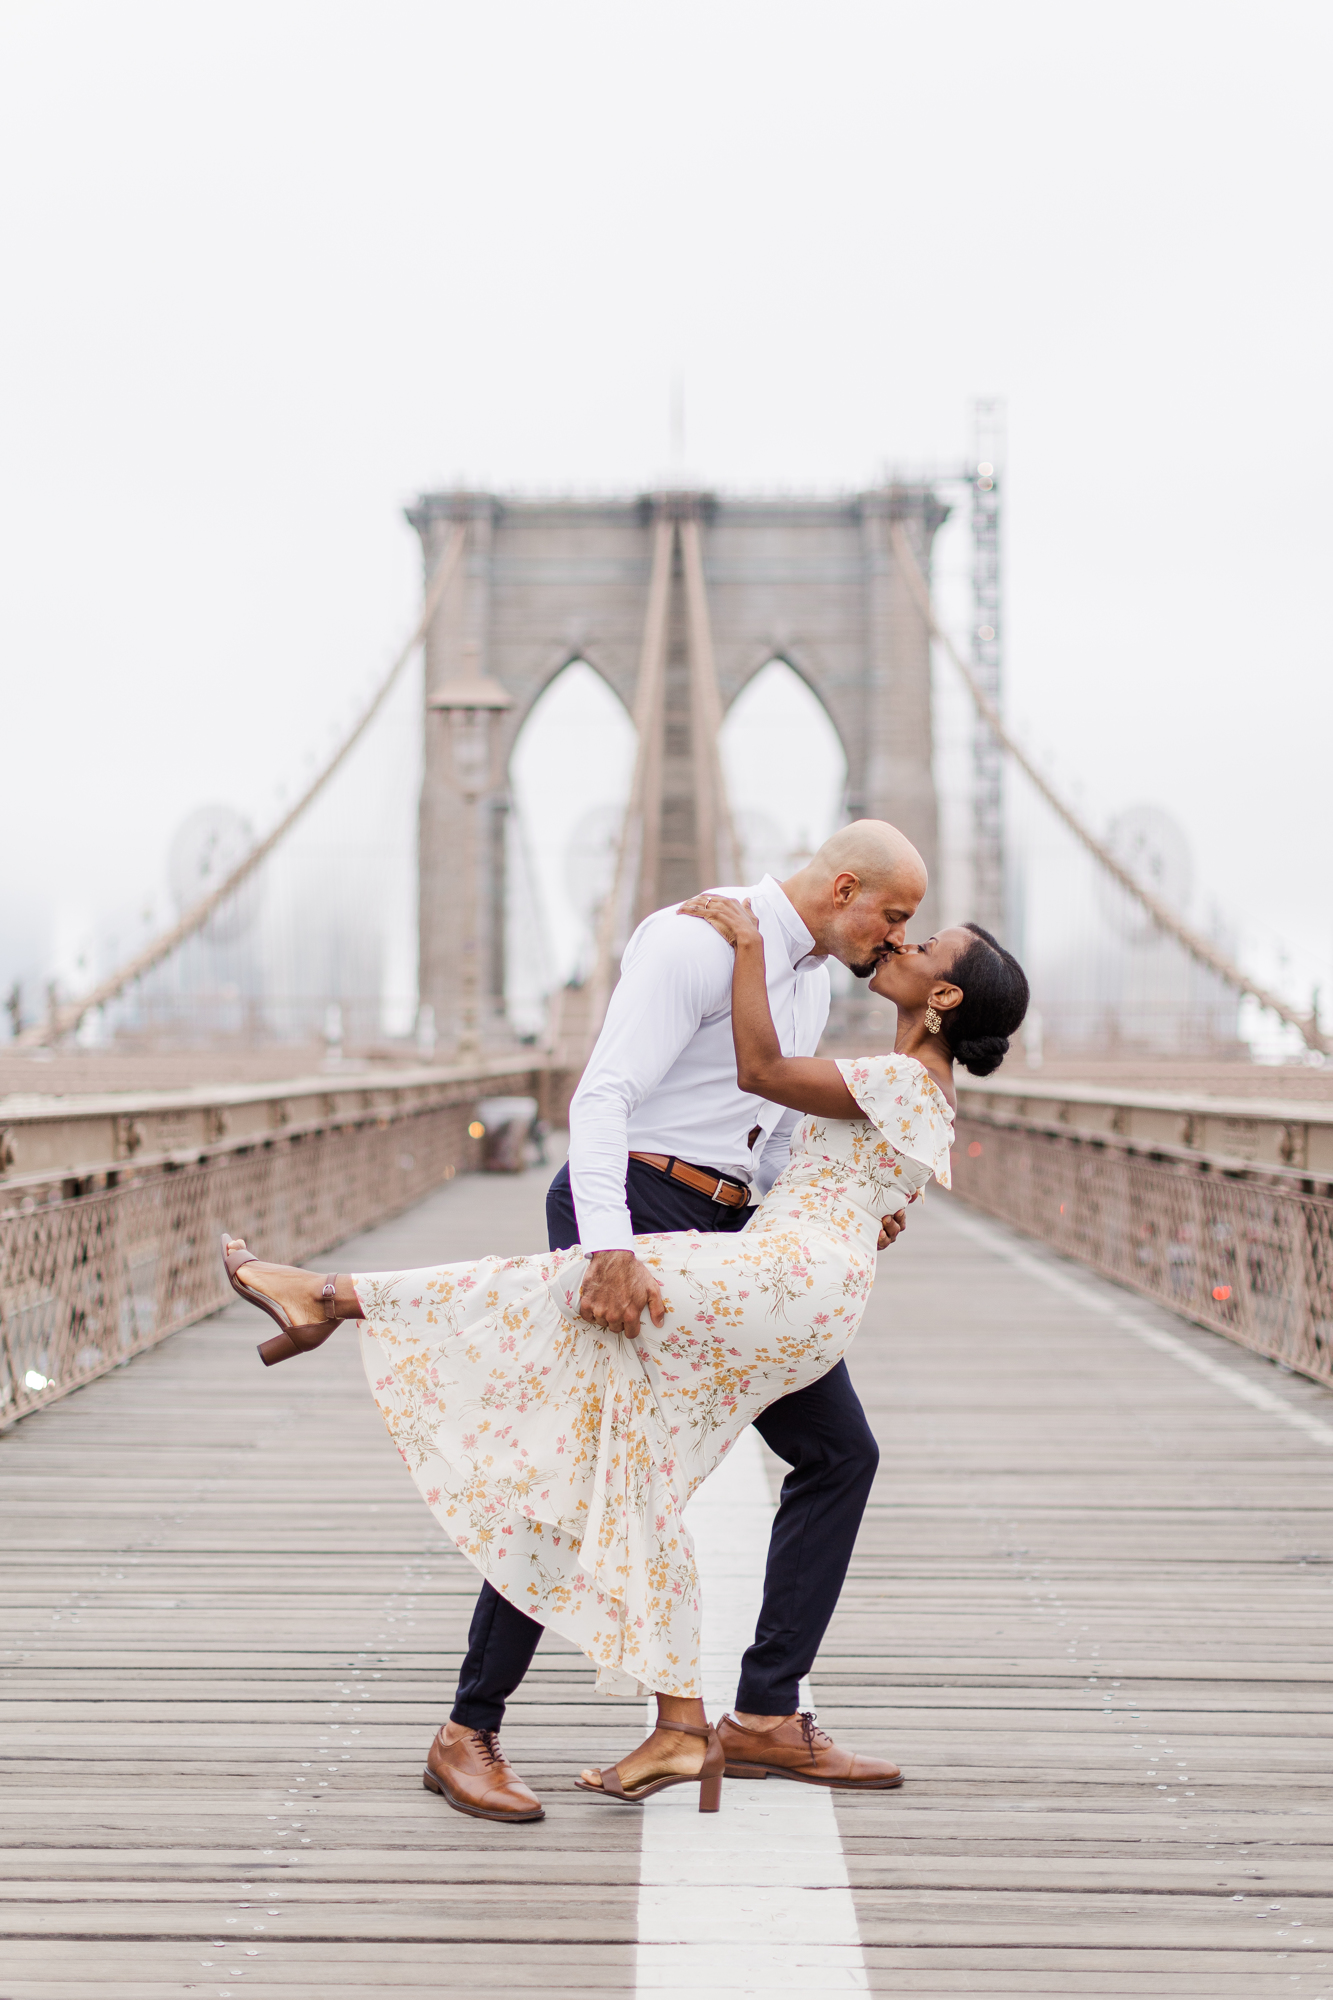 Special New York Engagement Photos on the Brooklyn Bridge